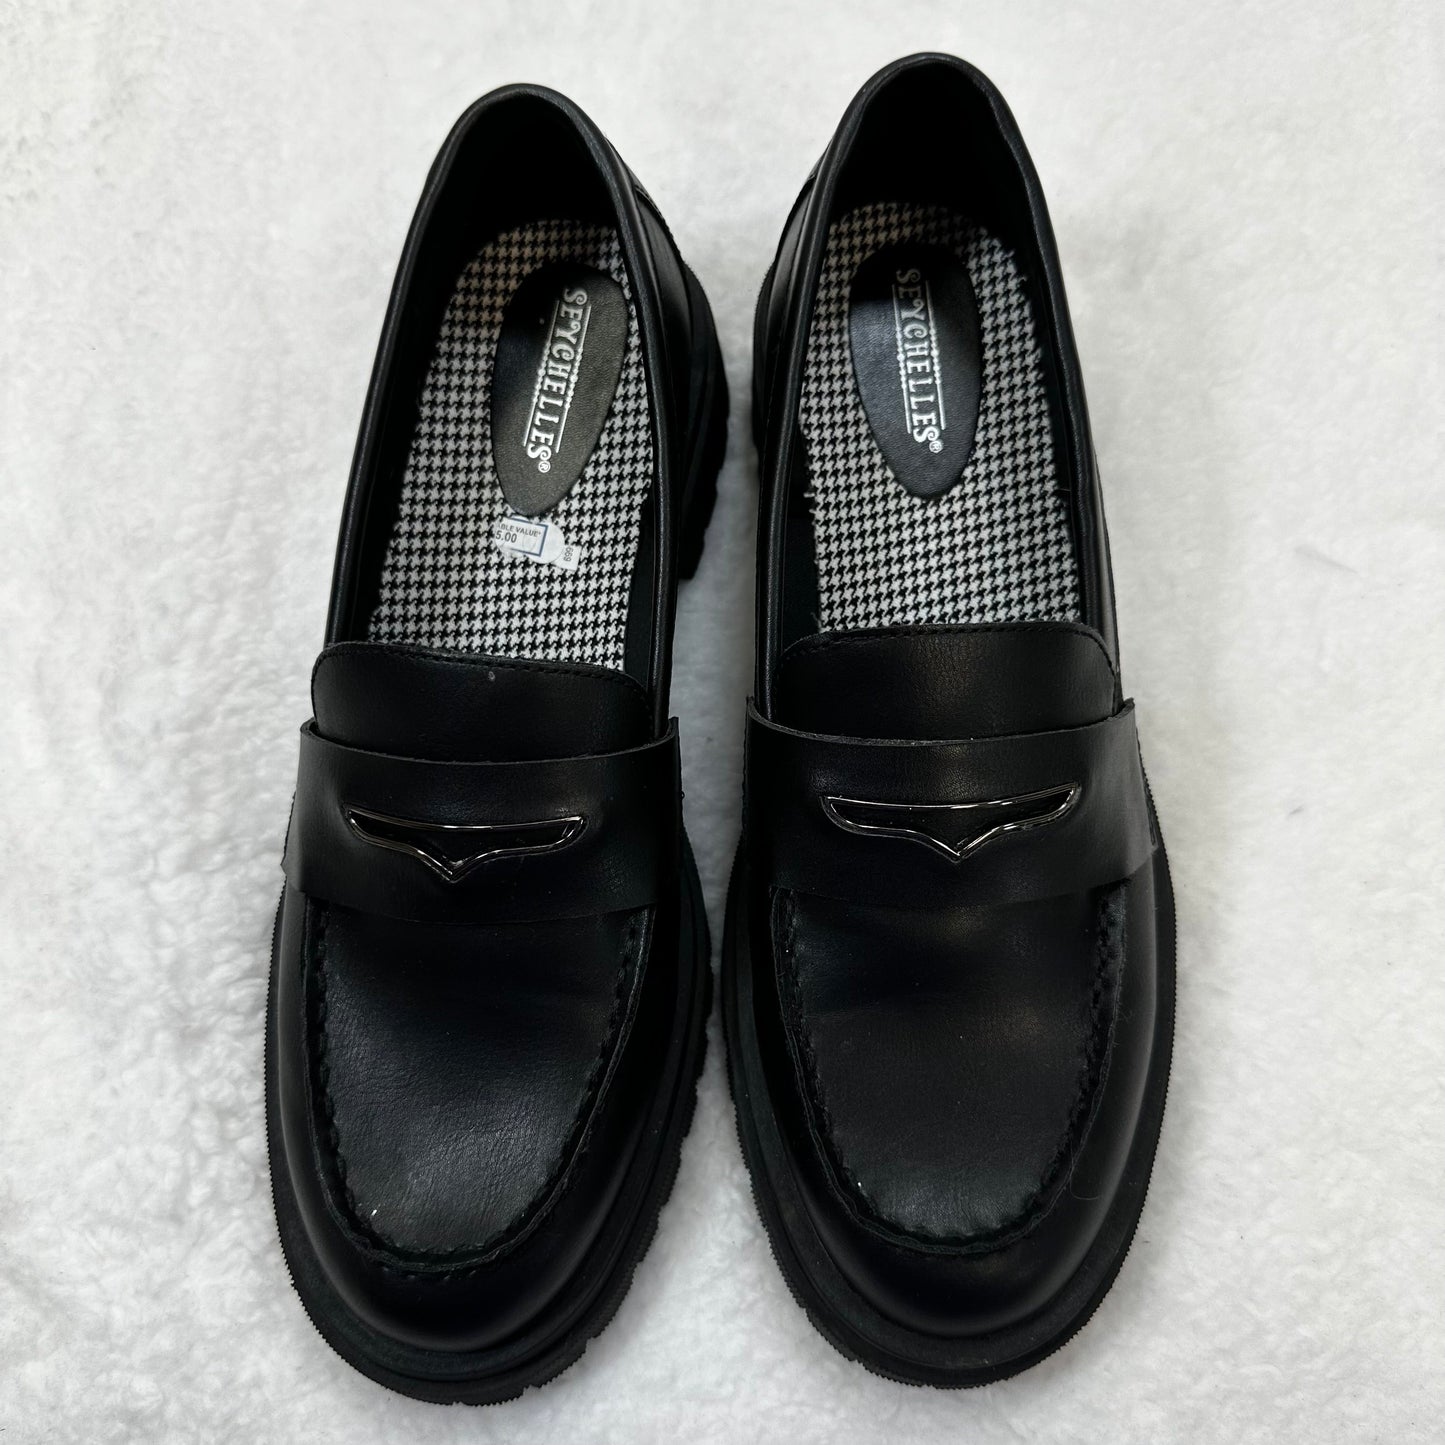 Black Shoes Flats Loafer Oxford Seychelles, Size 9.5